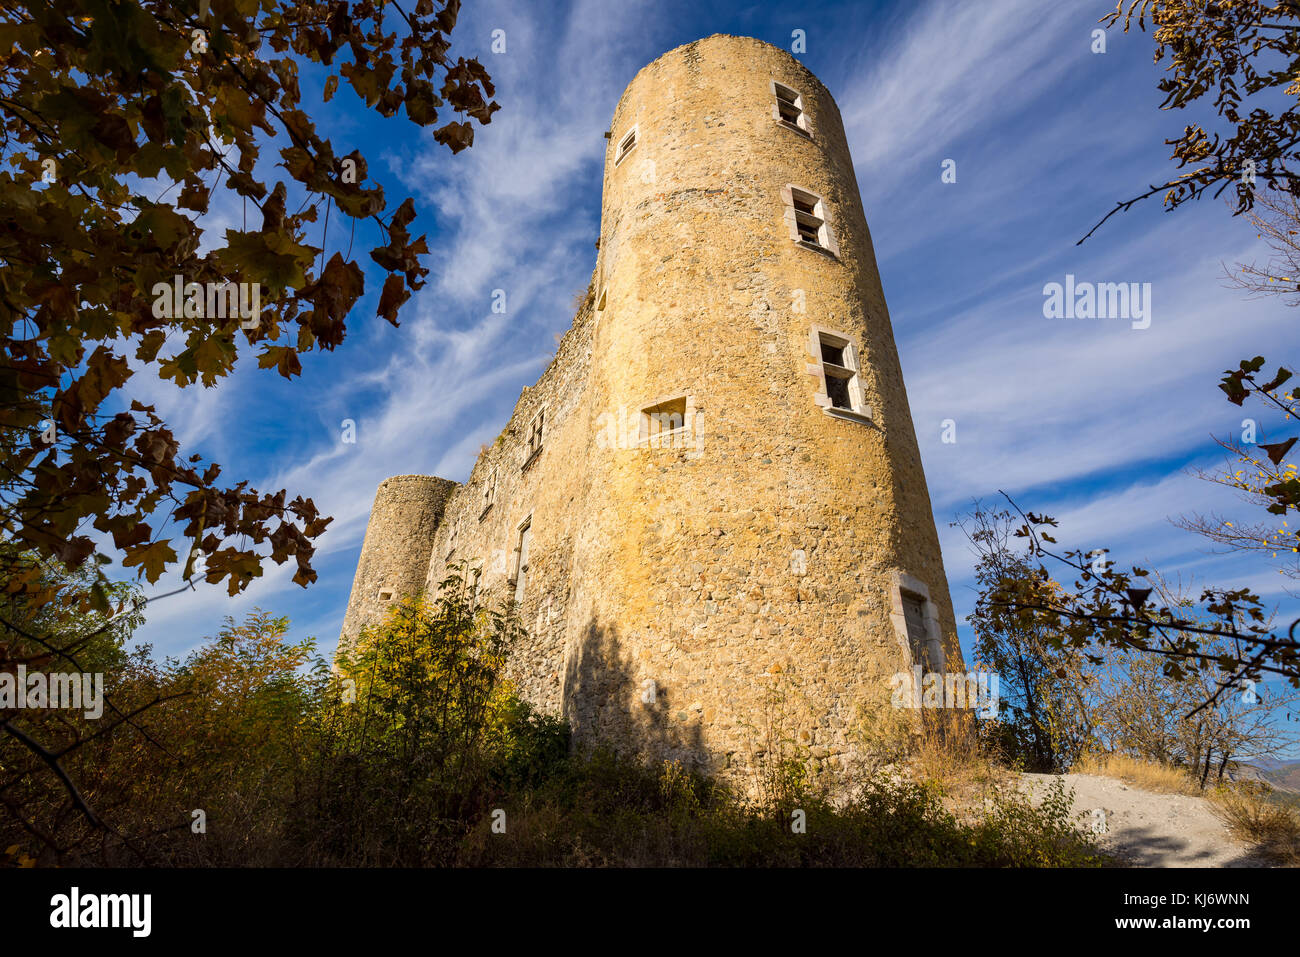 The ruins of the Midle Age Tallard castle with its stone facade. Hautes-Alpes, France Stock Photo